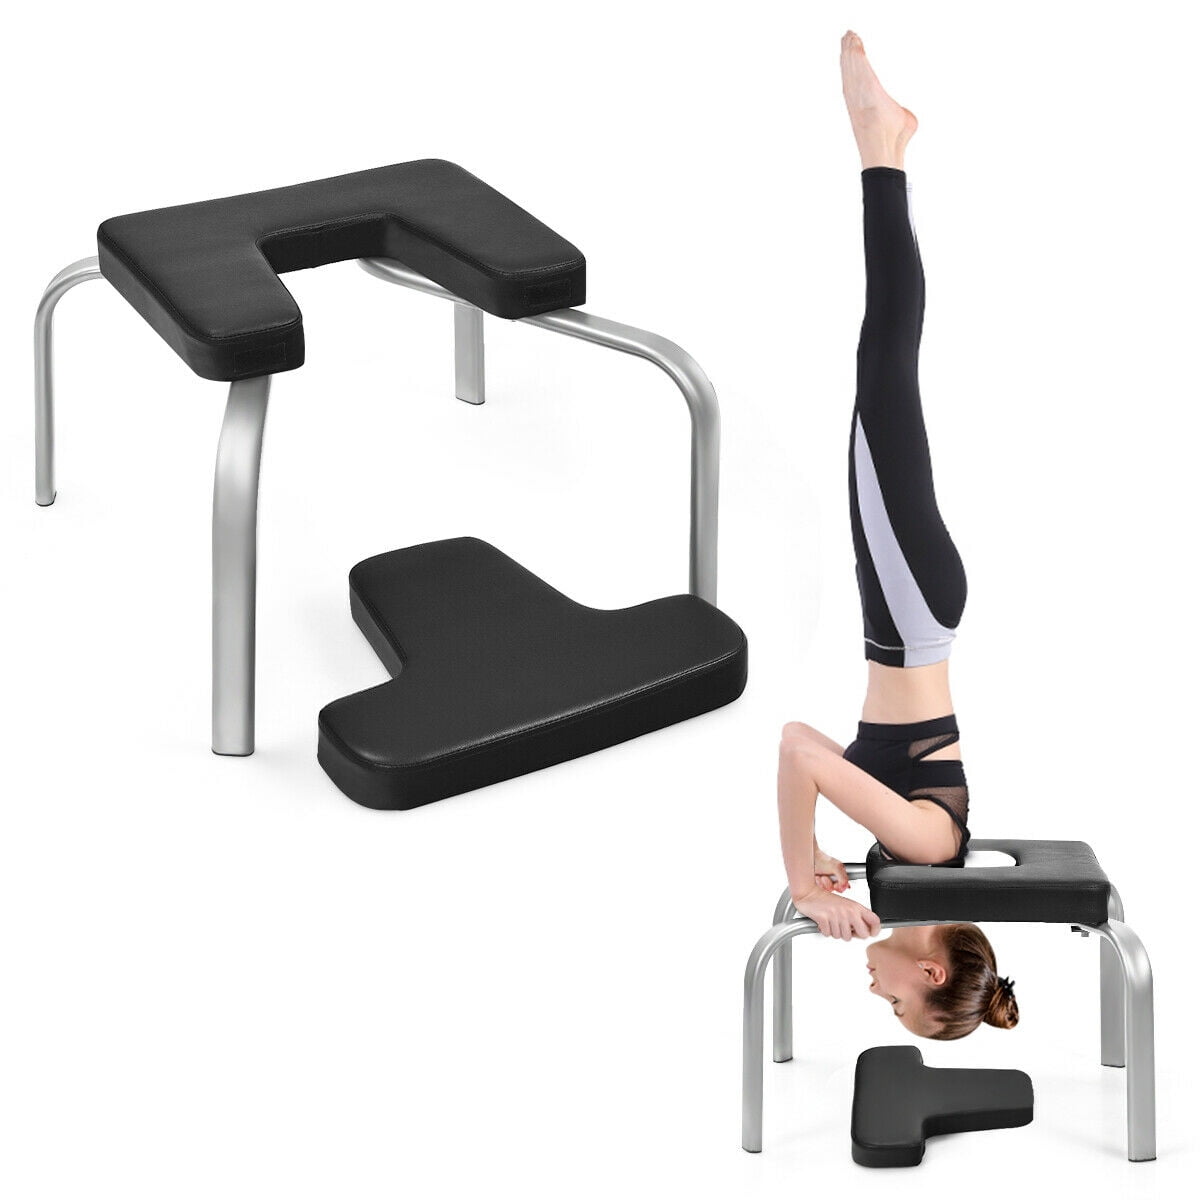 Details about   Yoga Headstand Chair Inversion Wooden Bench Therapy Trainer Exercise Home Sports 